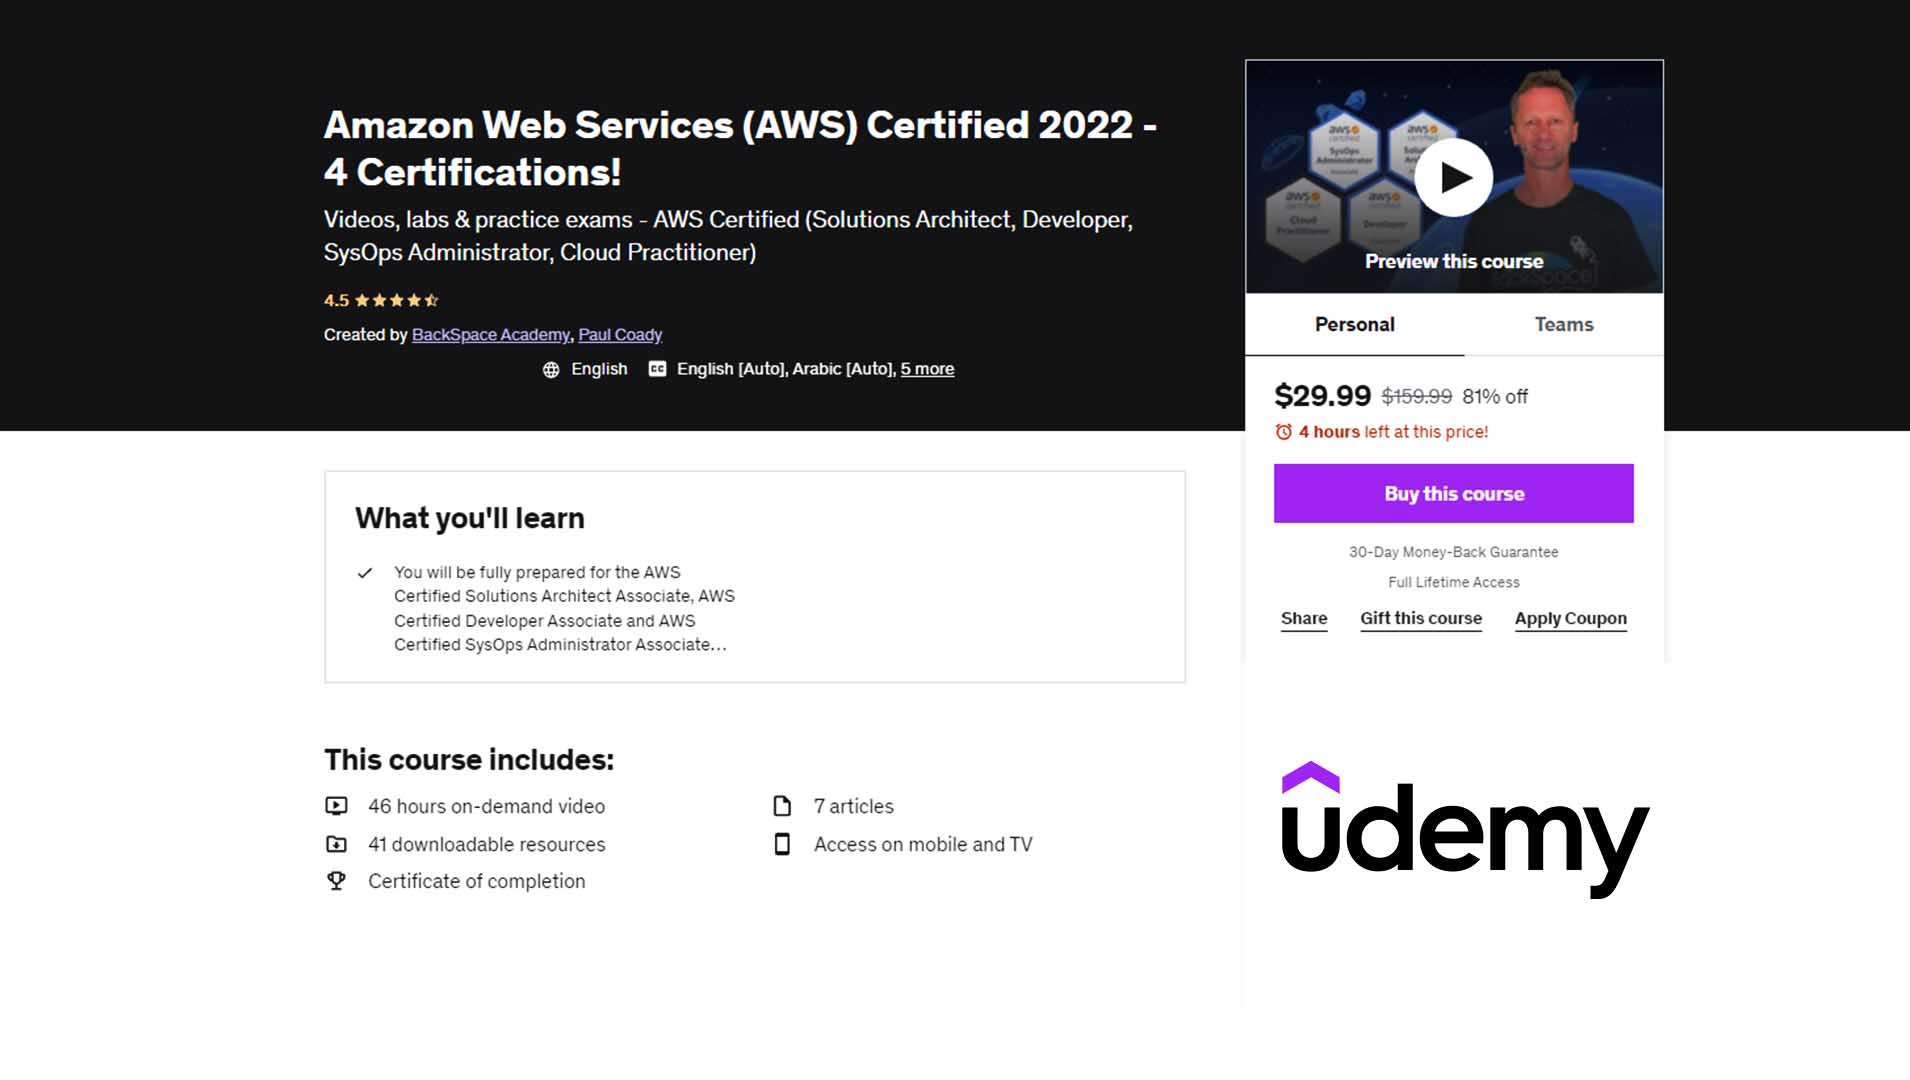 Amazon Web Services (AWS) Certified 2022 - 4 Certifications!